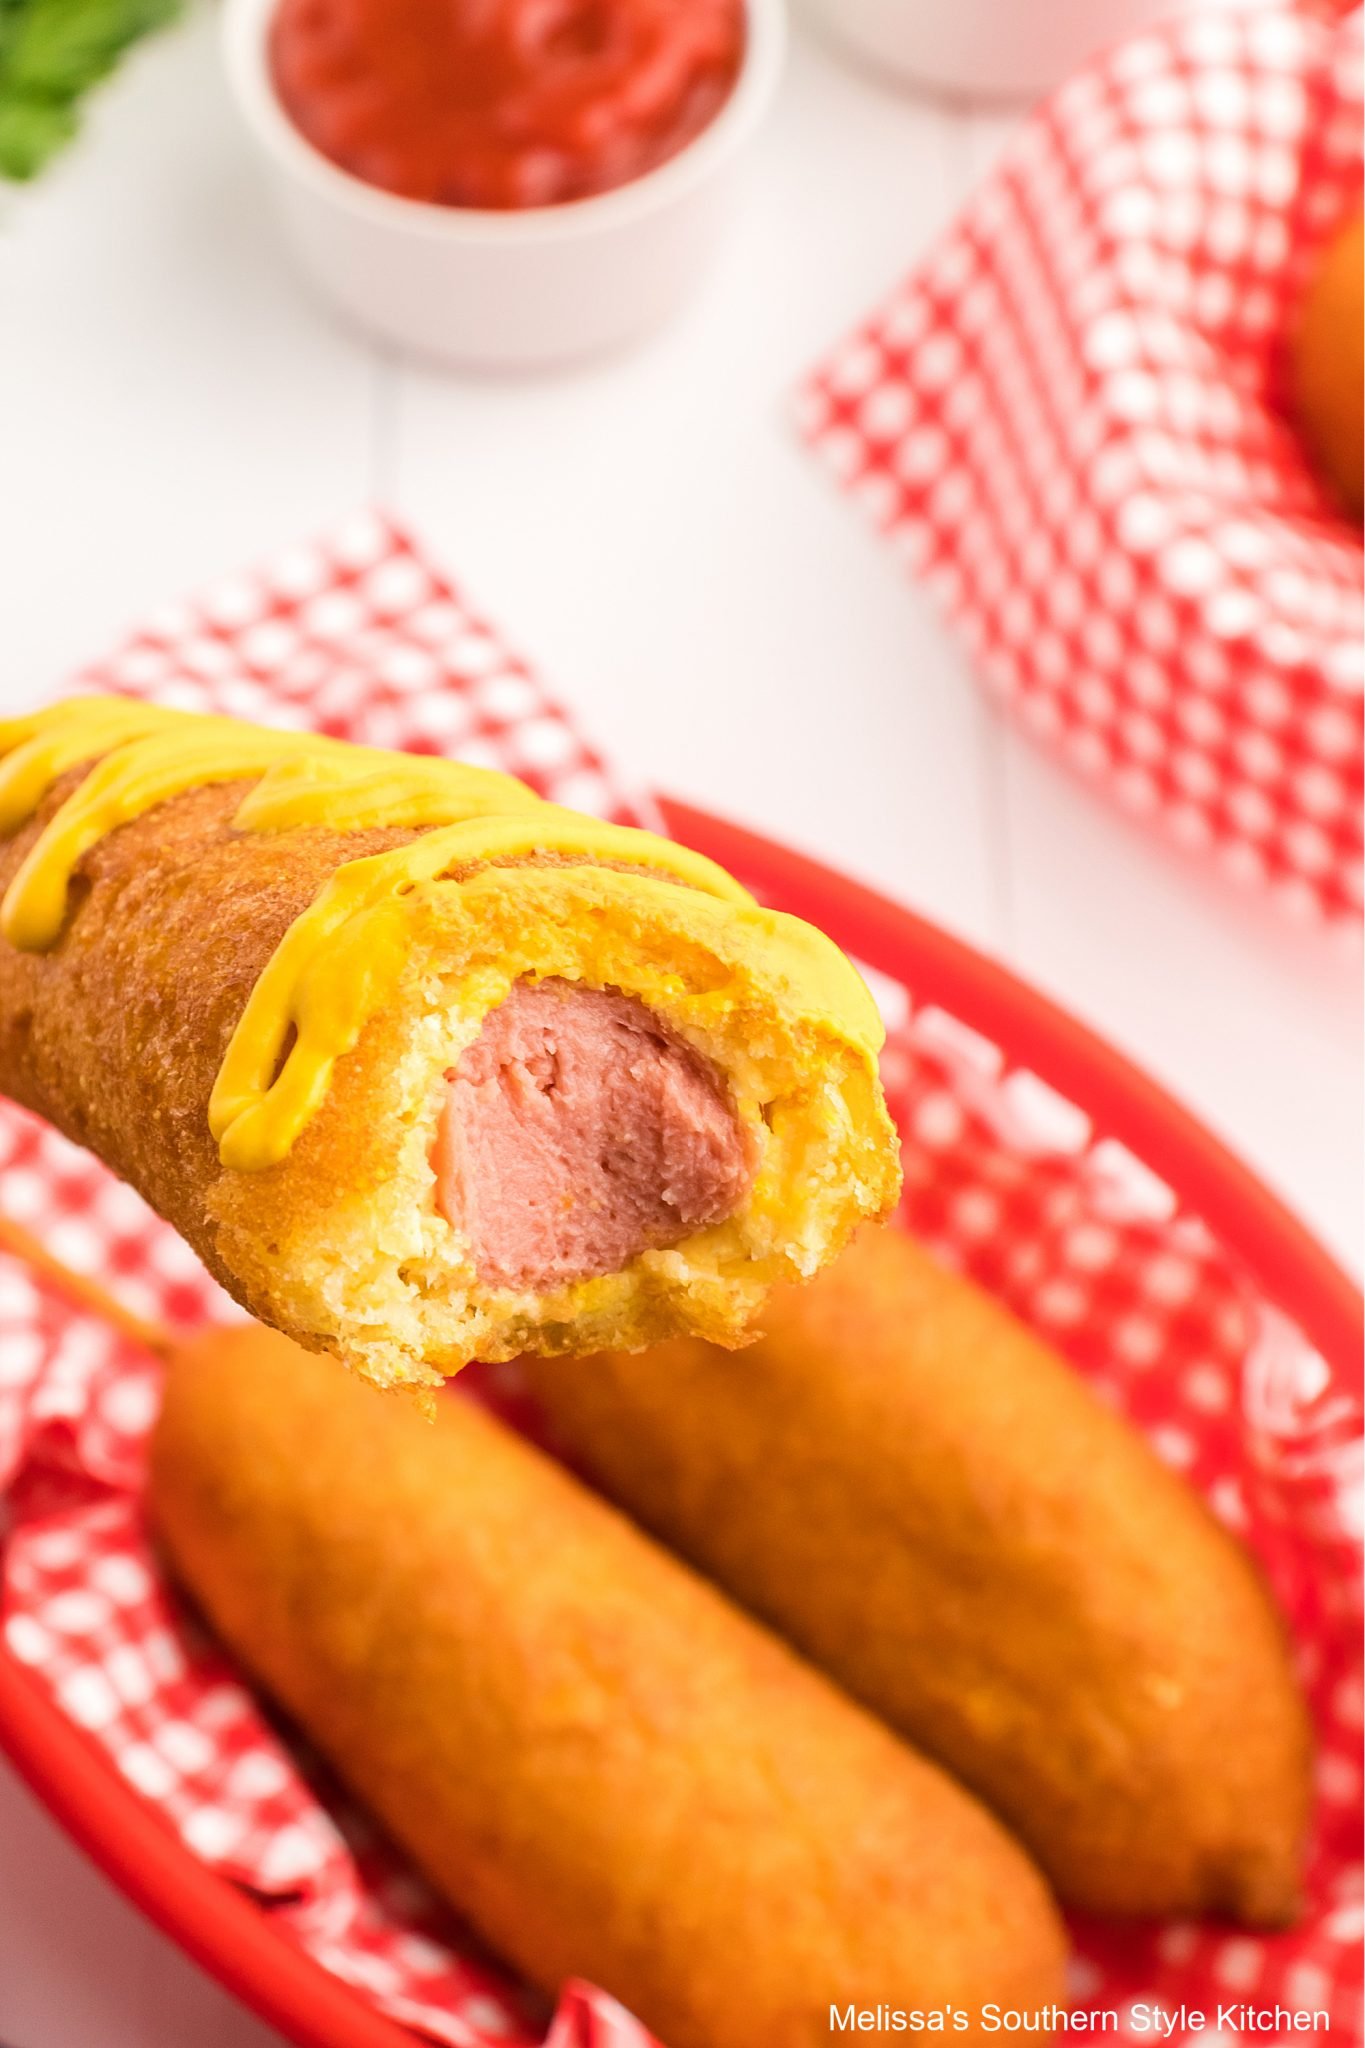 Homemade Corn Dogs with mustard